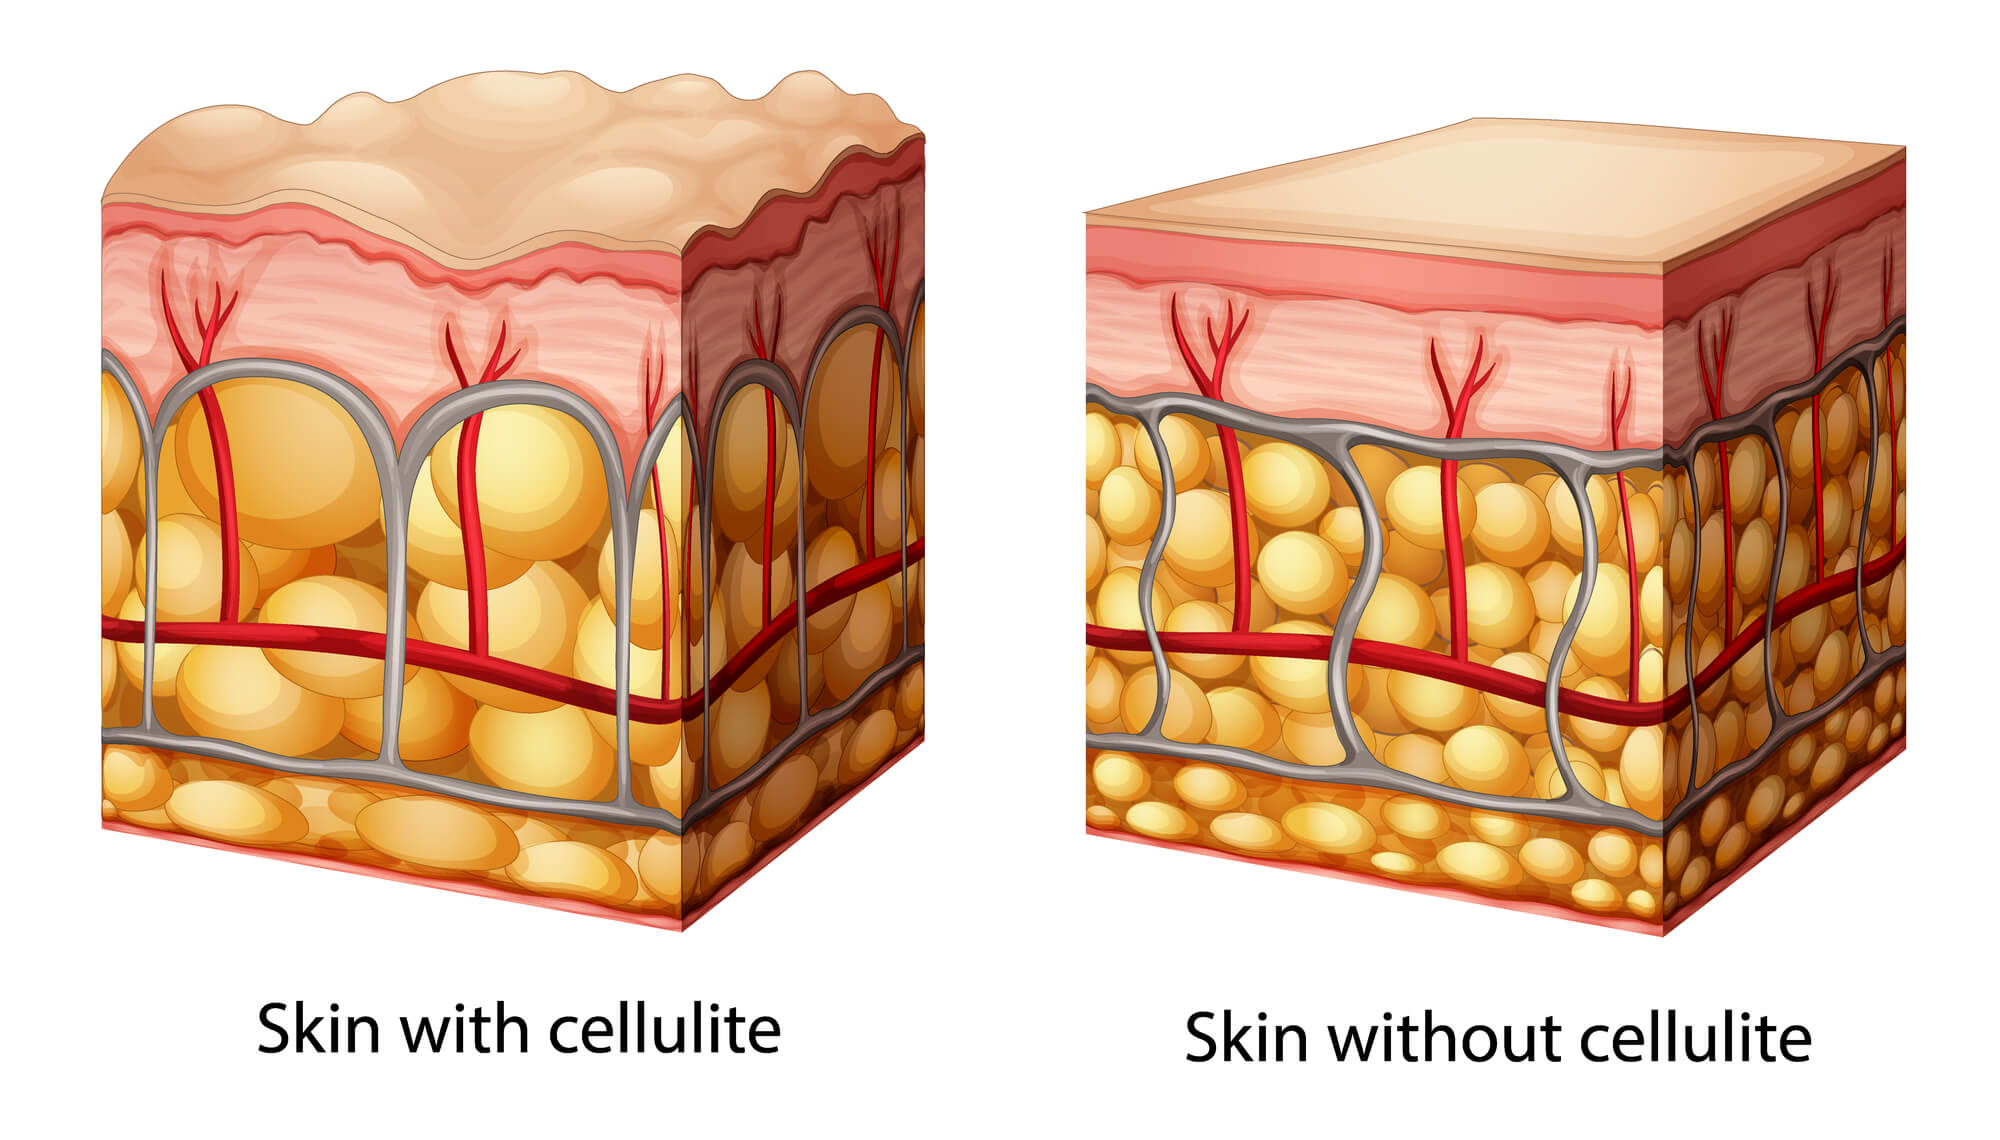 What exactly is cellulite?